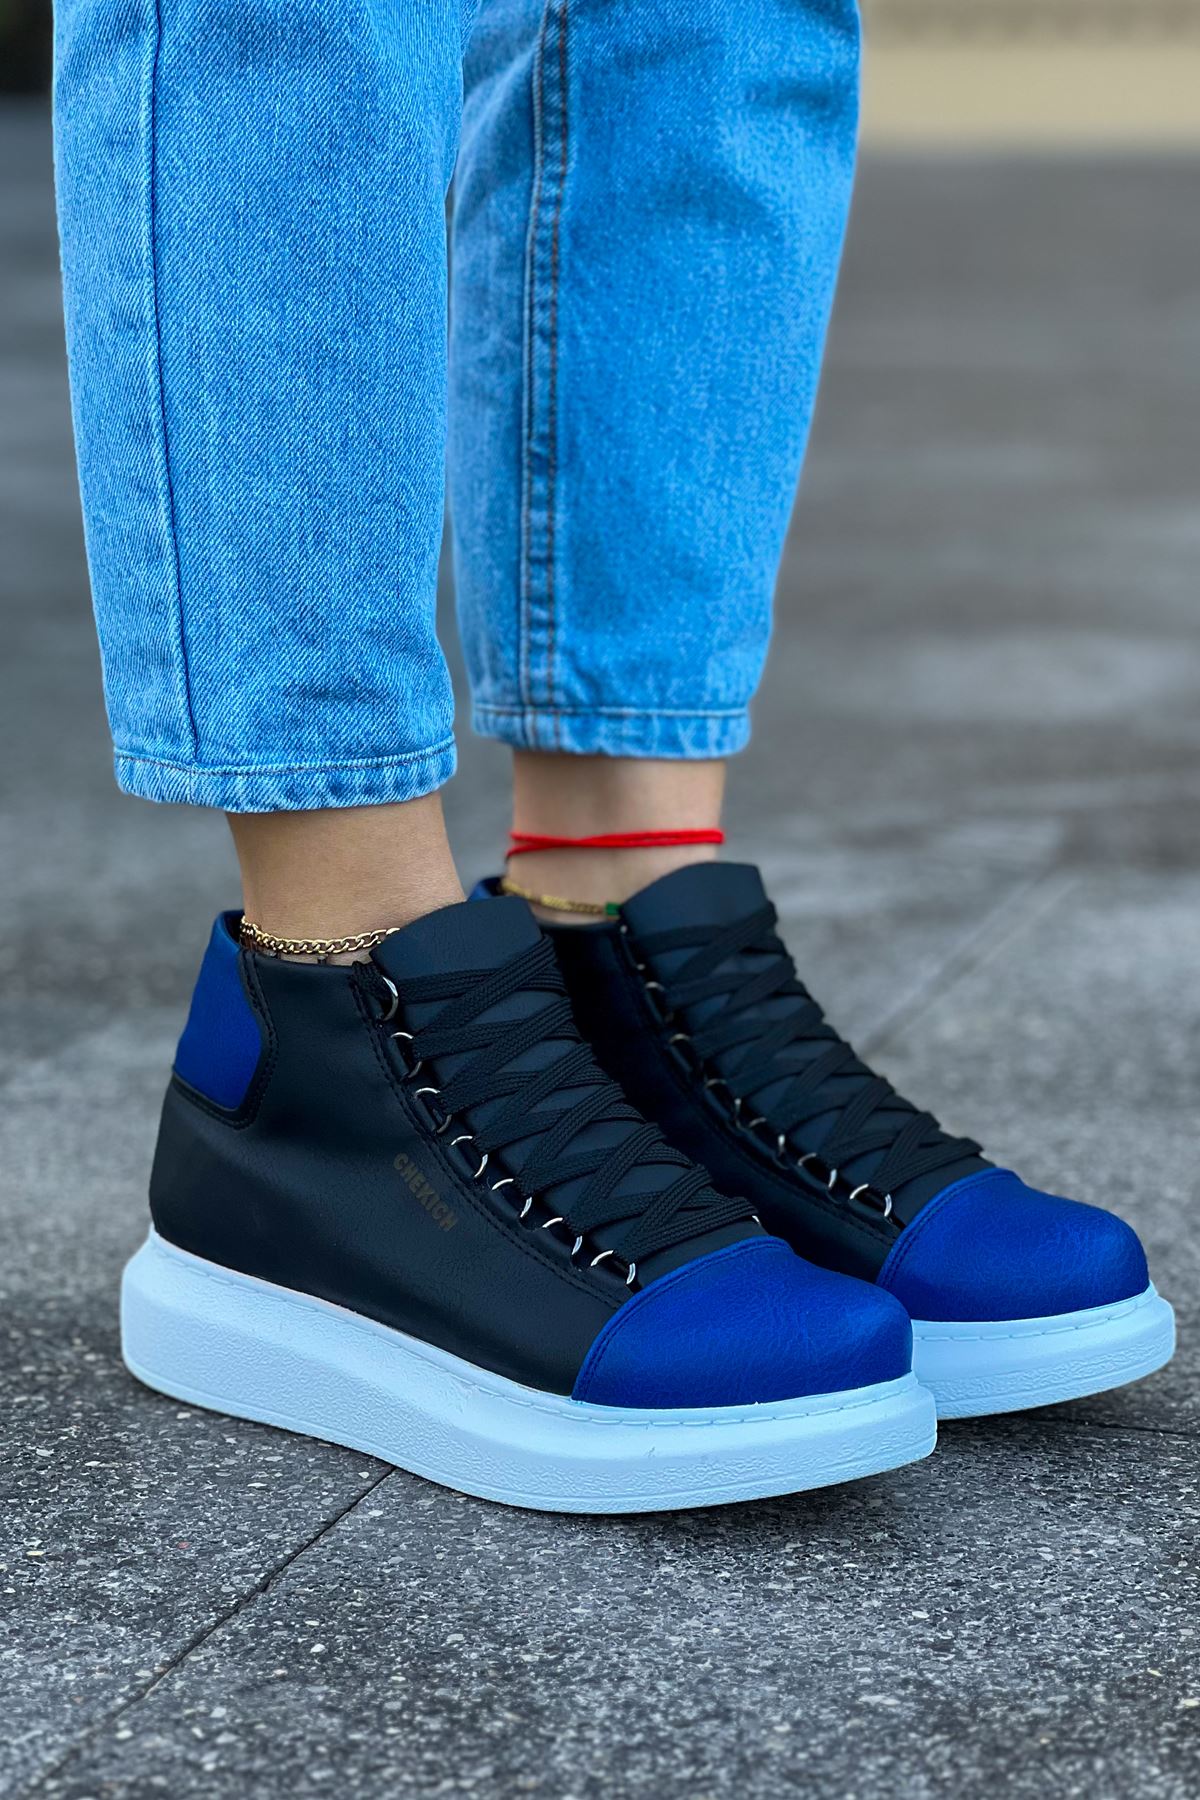 CH258 GBT Roma Colorful Women's Boots BLACK/SAX BLUE - STREETMODE ™